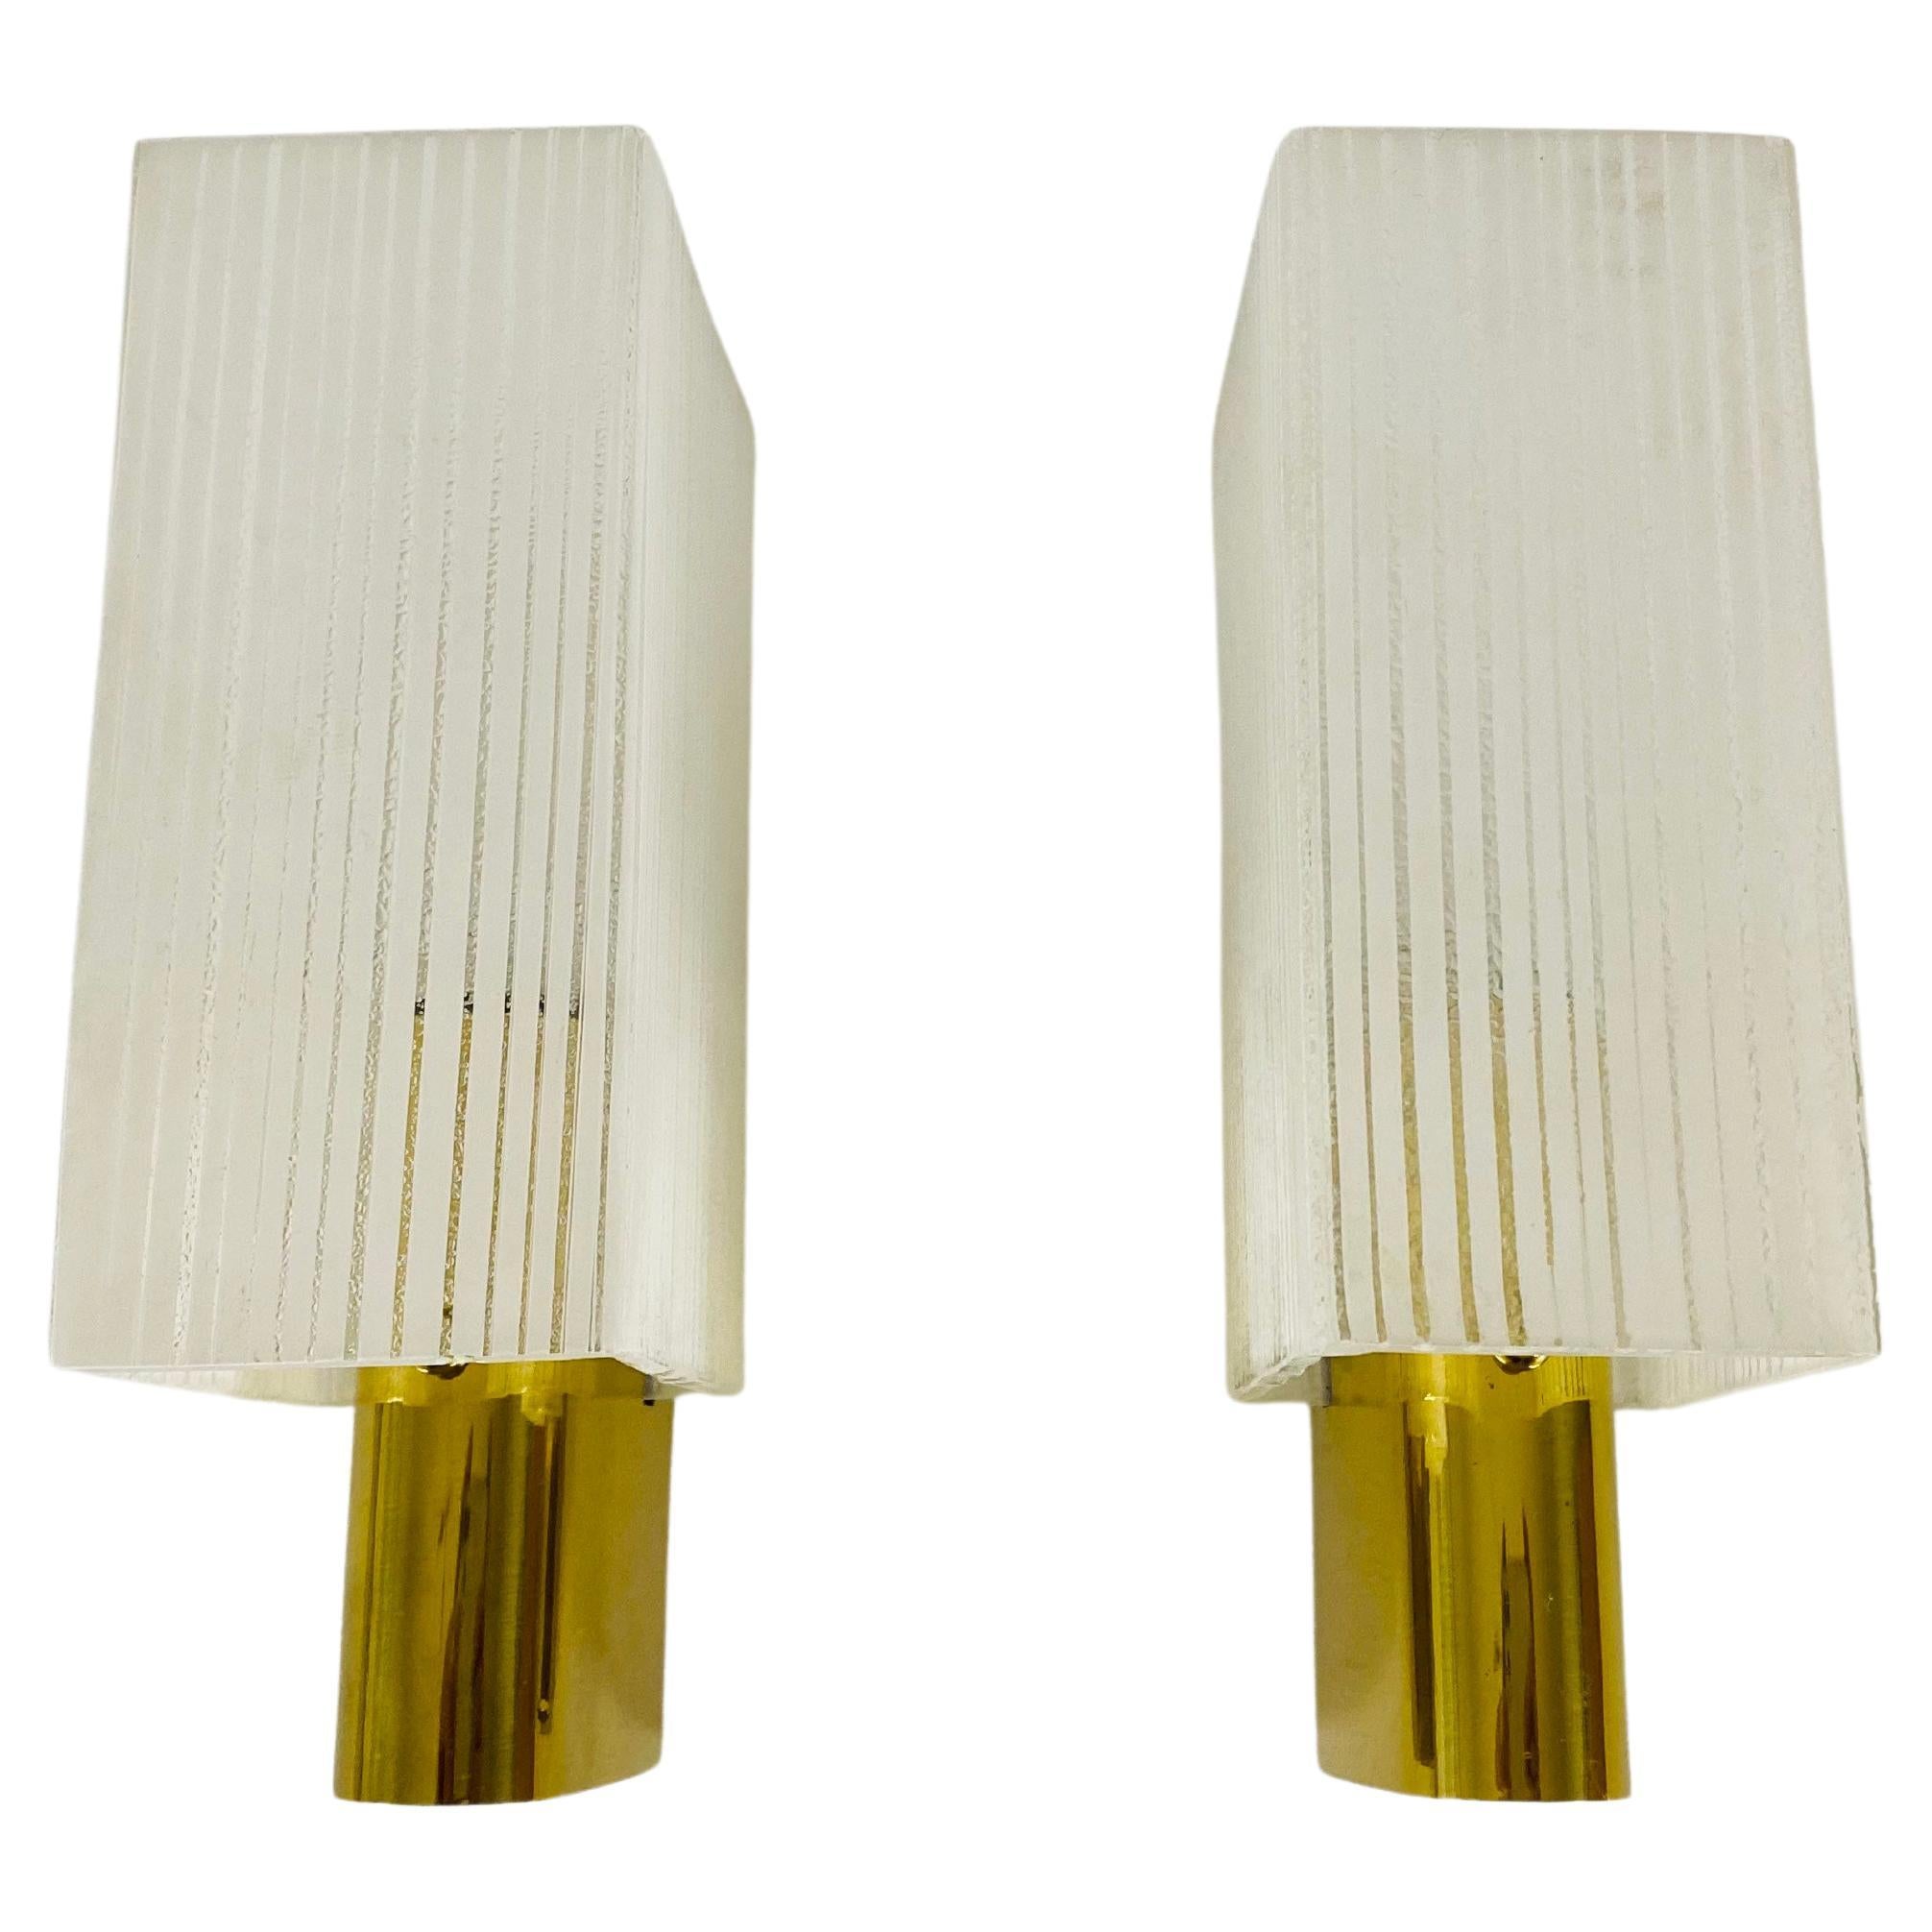 Pair of 2 Brass and Glass Sconces, 1960s, Germany For Sale